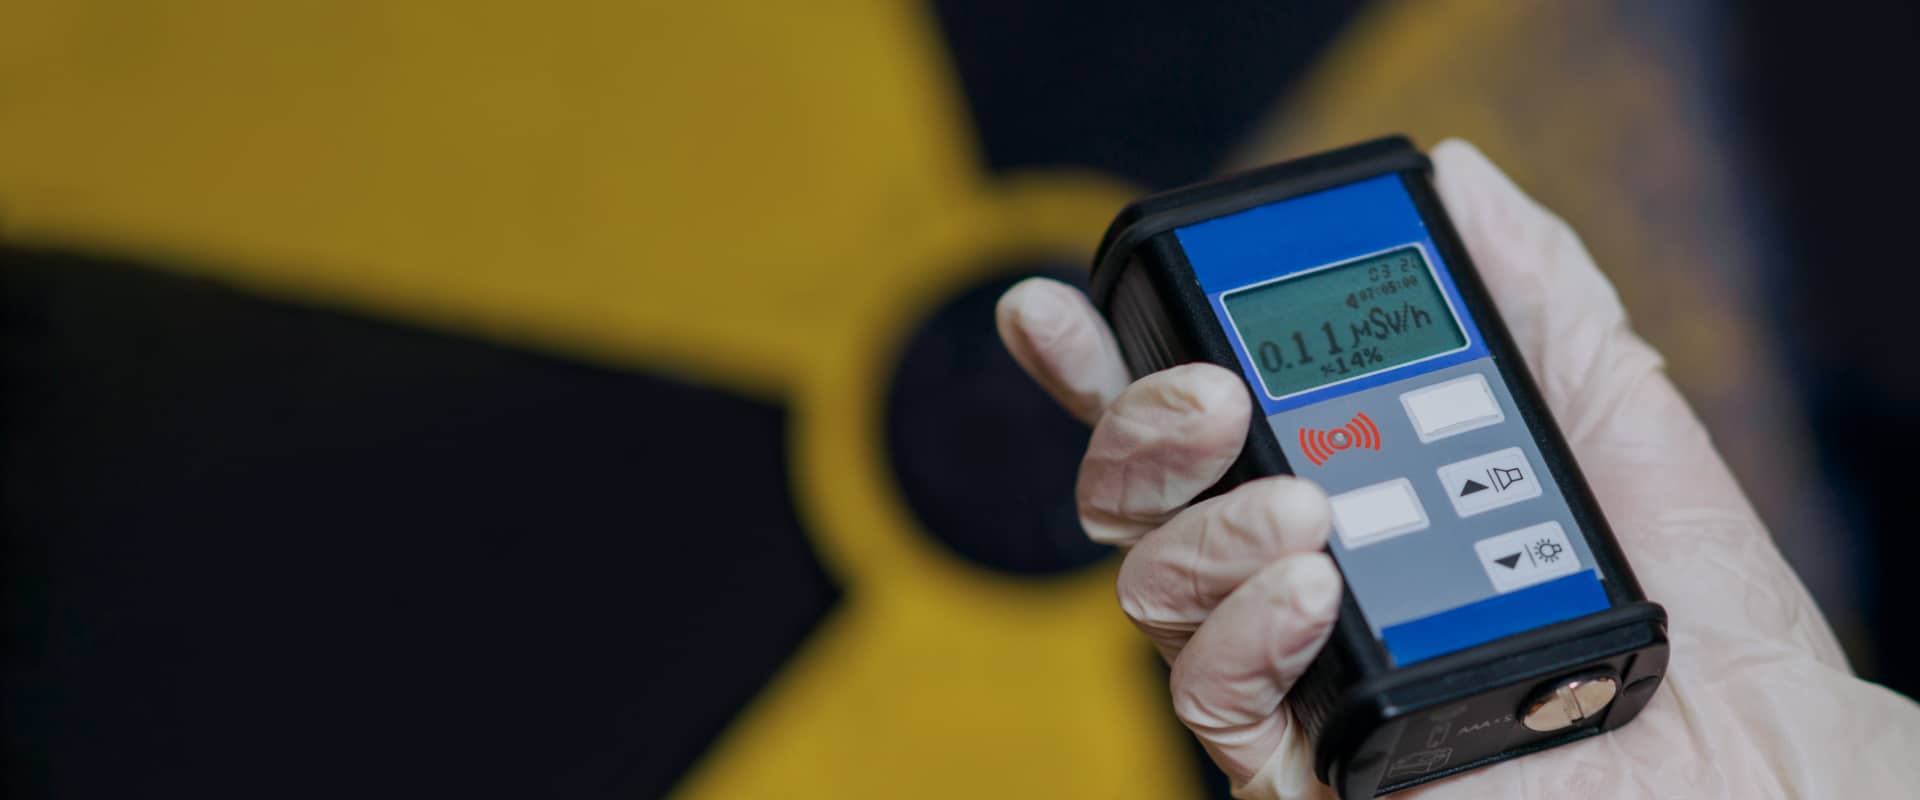 A person holding a device on Ionizing radiation hazard symbol background